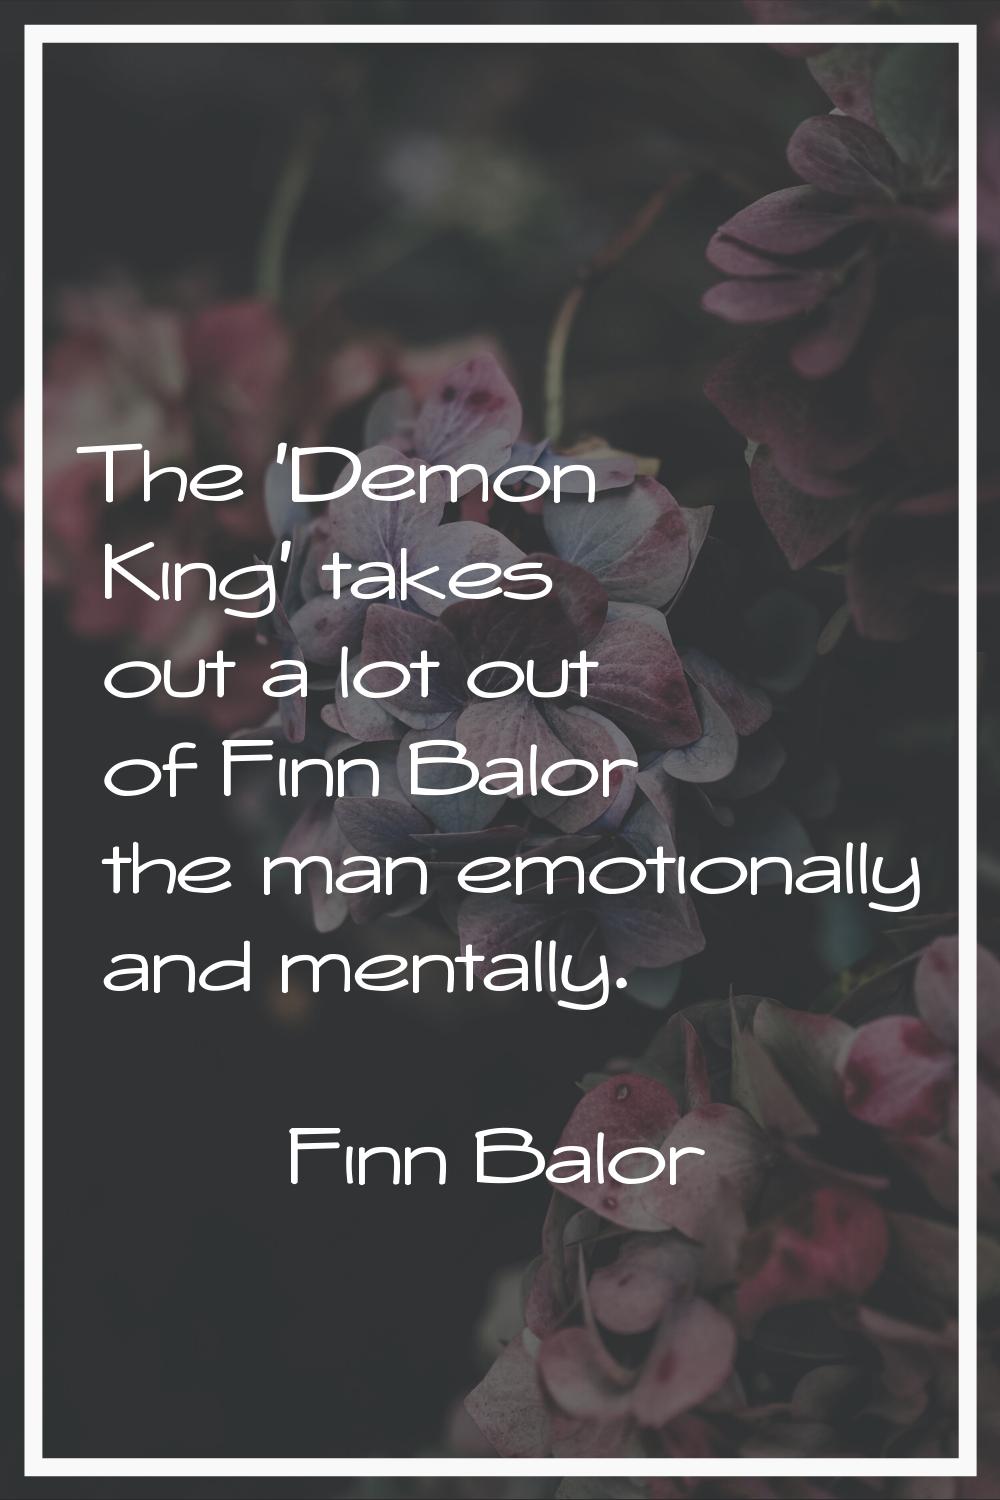 The 'Demon King' takes out a lot out of Finn Balor the man emotionally and mentally.